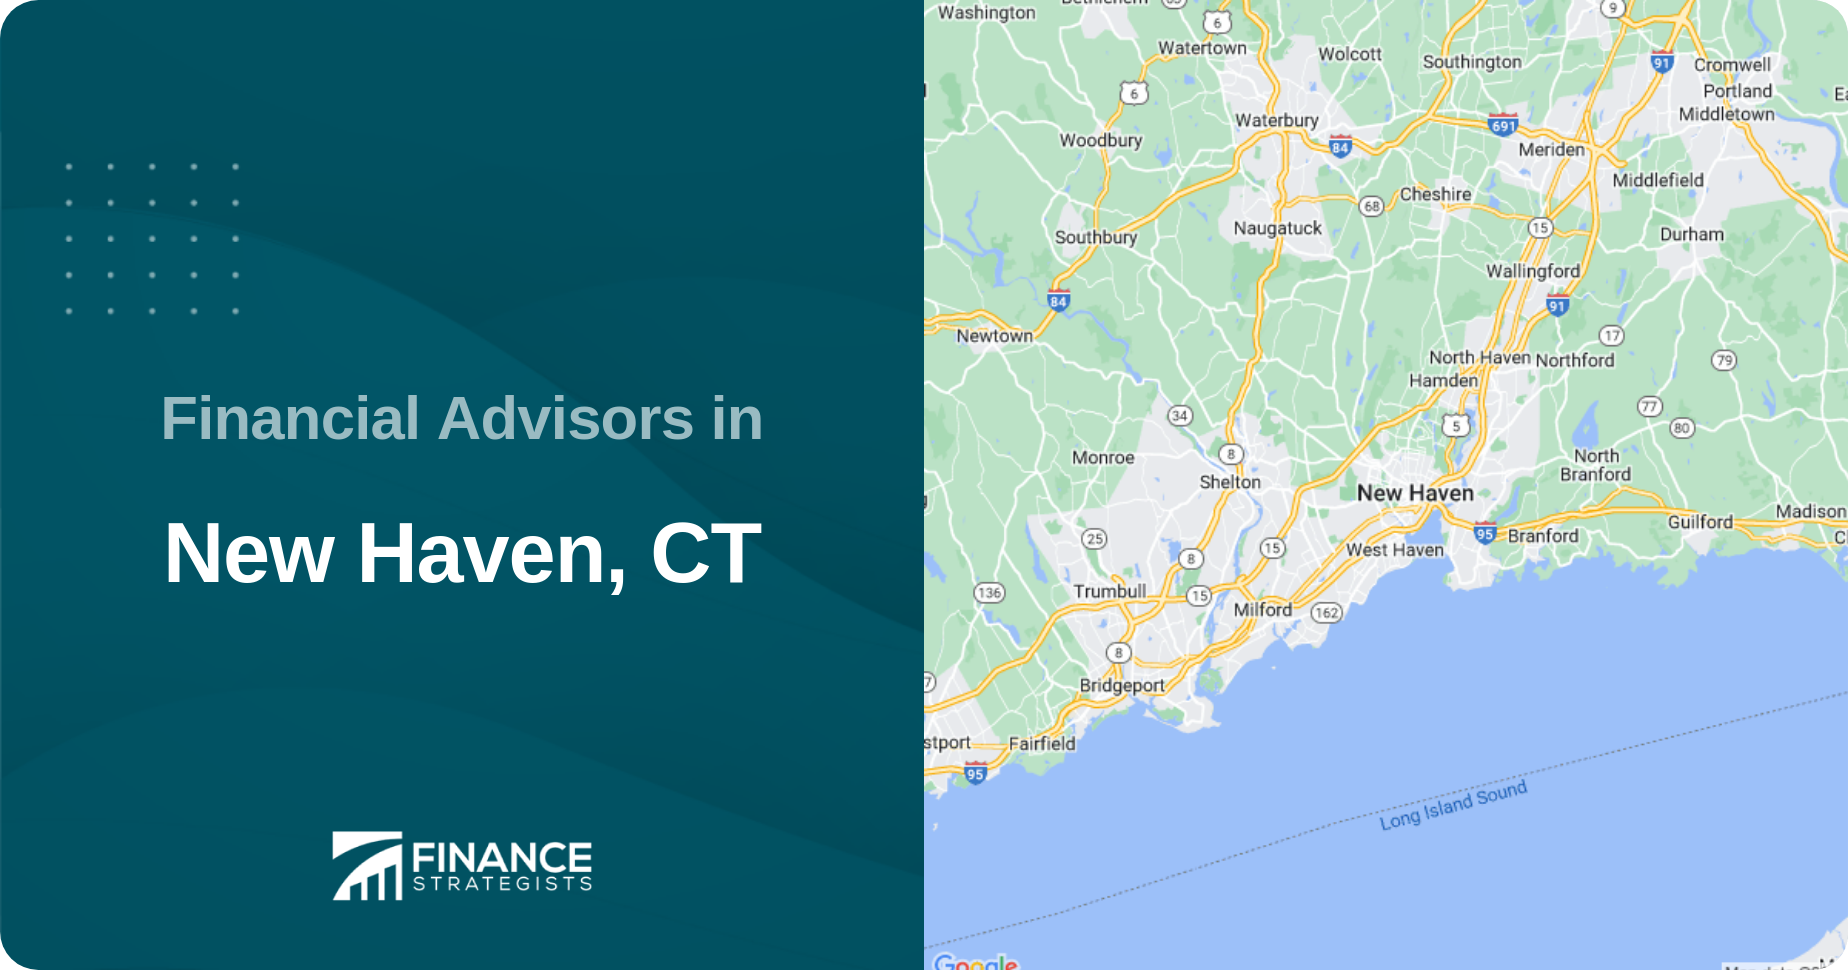 Financial Advisors in New Haven, CT